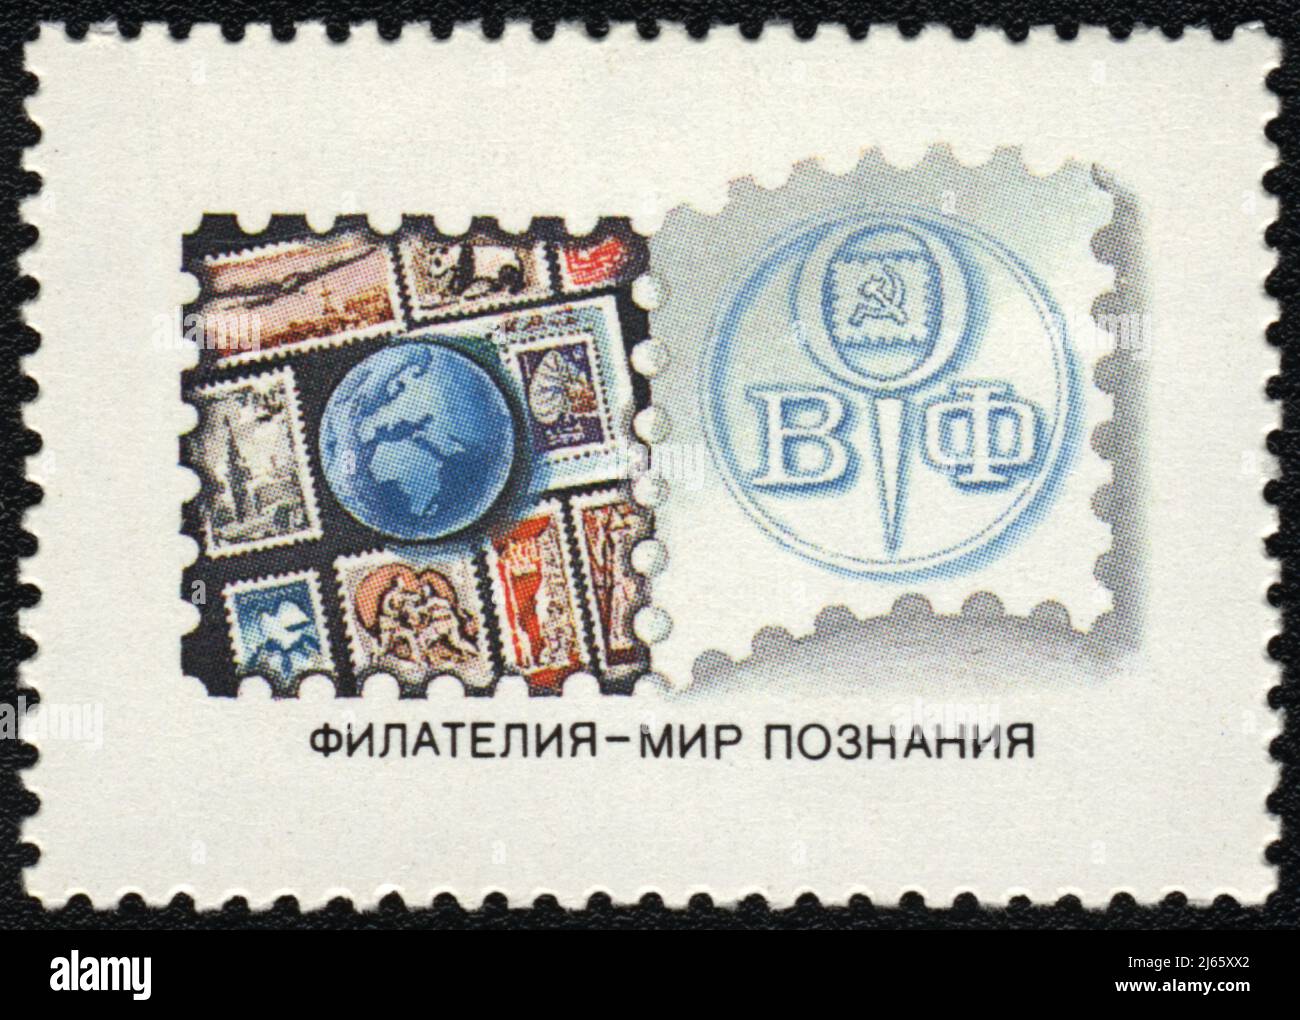 A stamp printed in USSR shows Philately - the world of knowledge, USSR Stock Photo